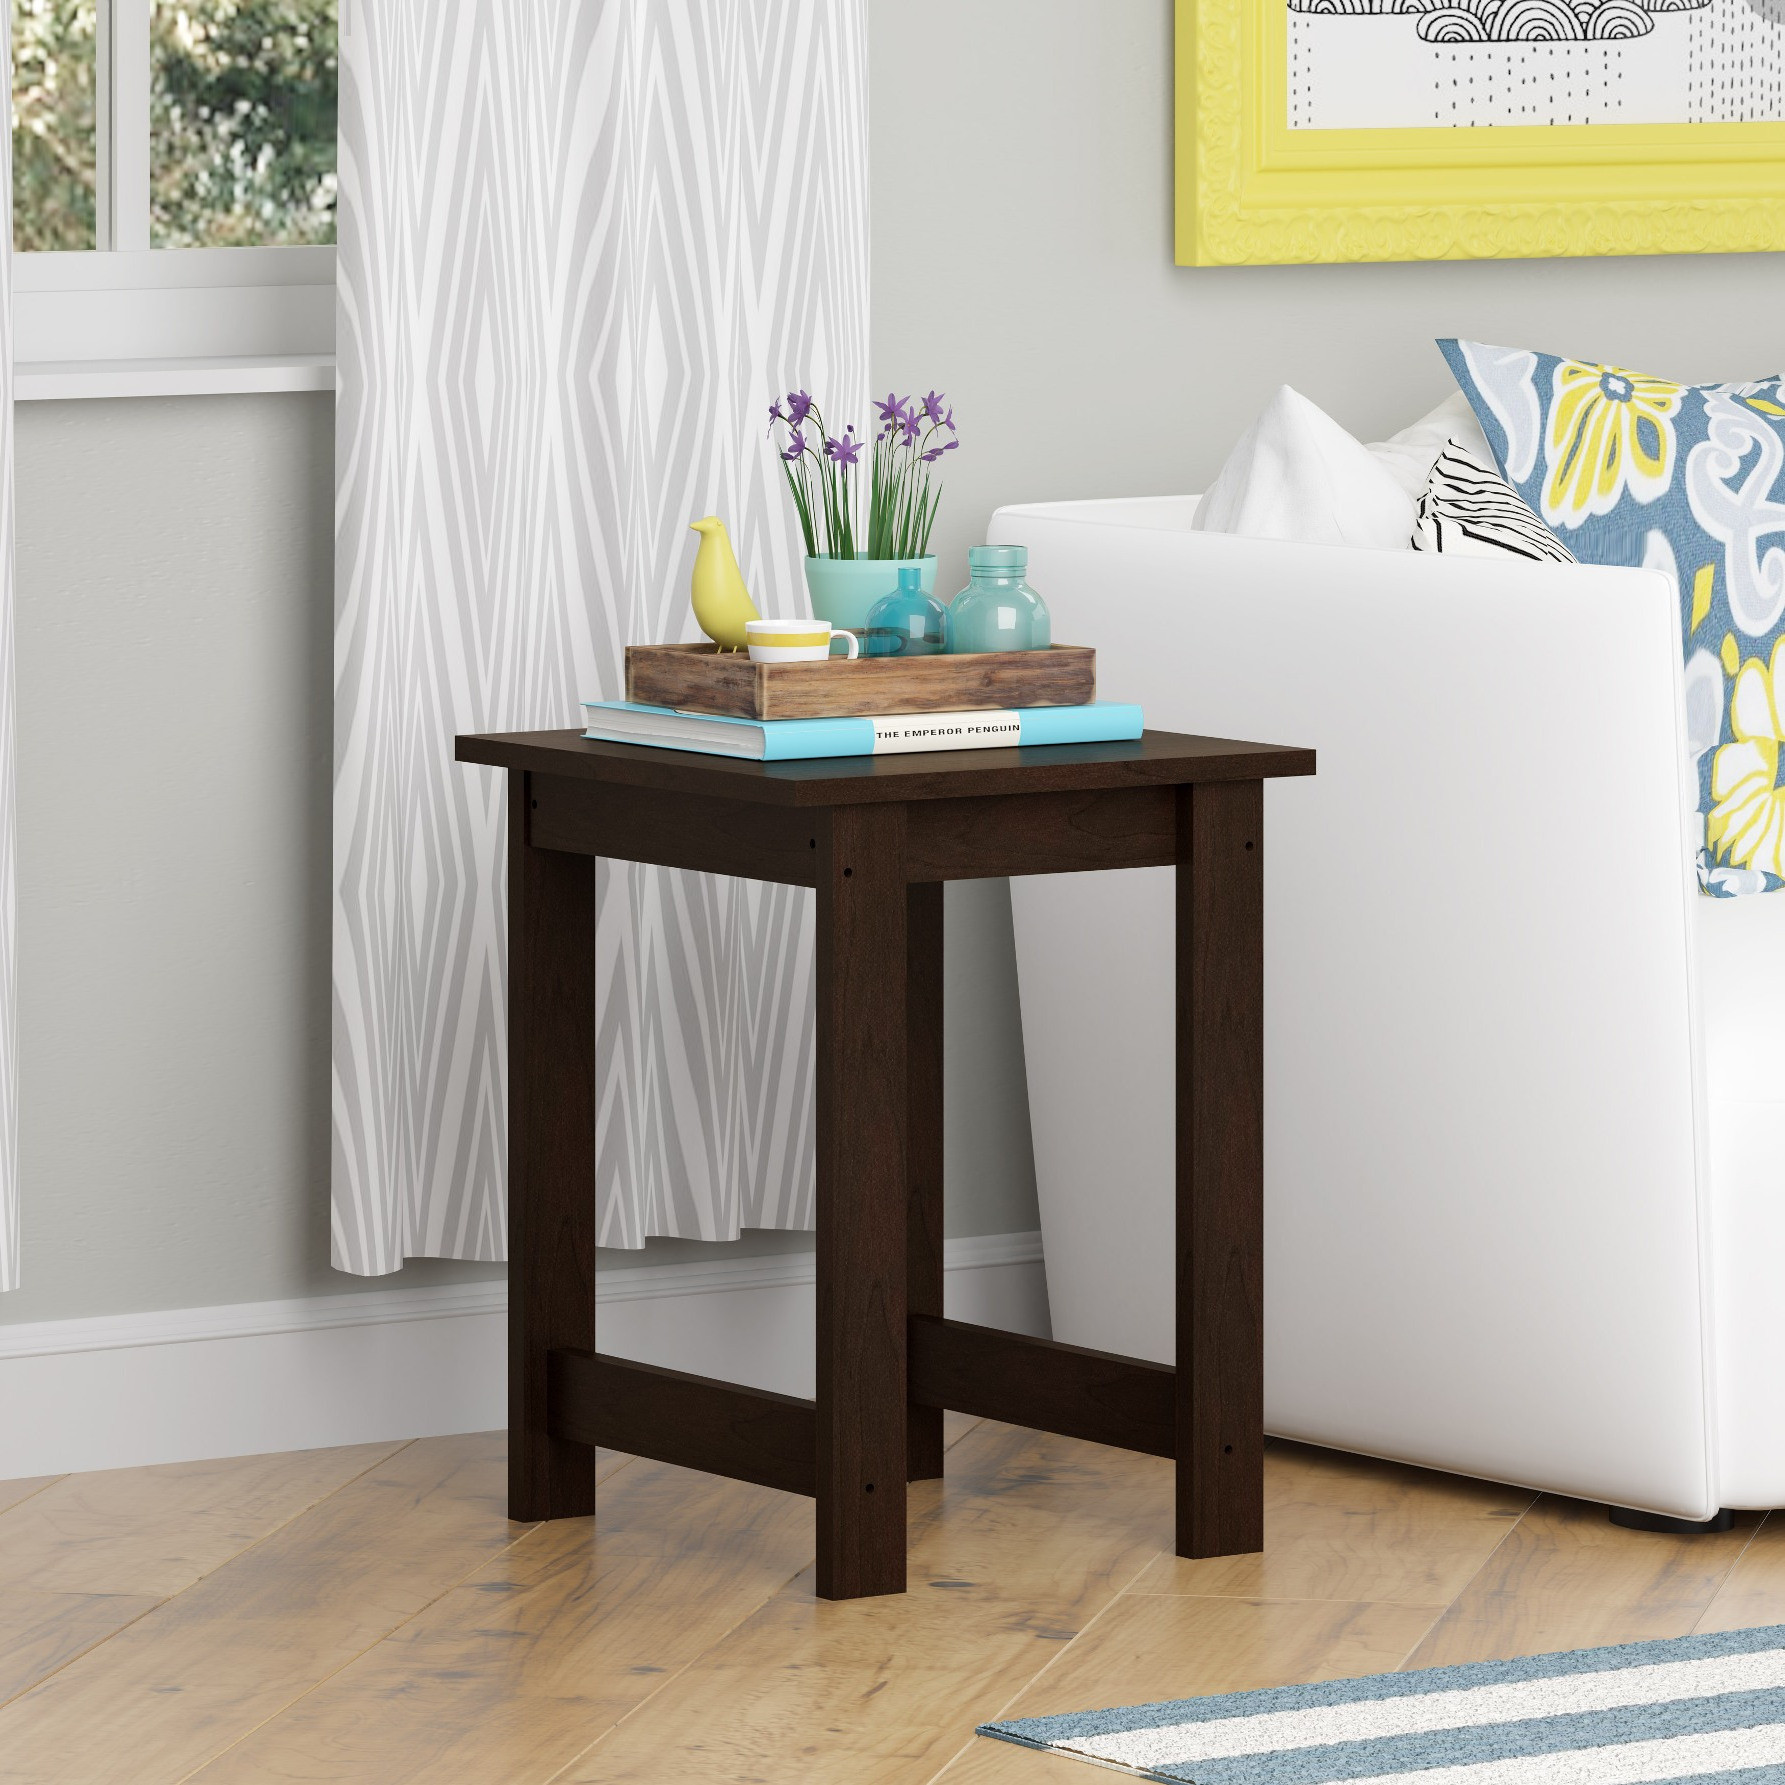 Living Room Table
 End Tables for Living Room Living Room Ideas on a Bud